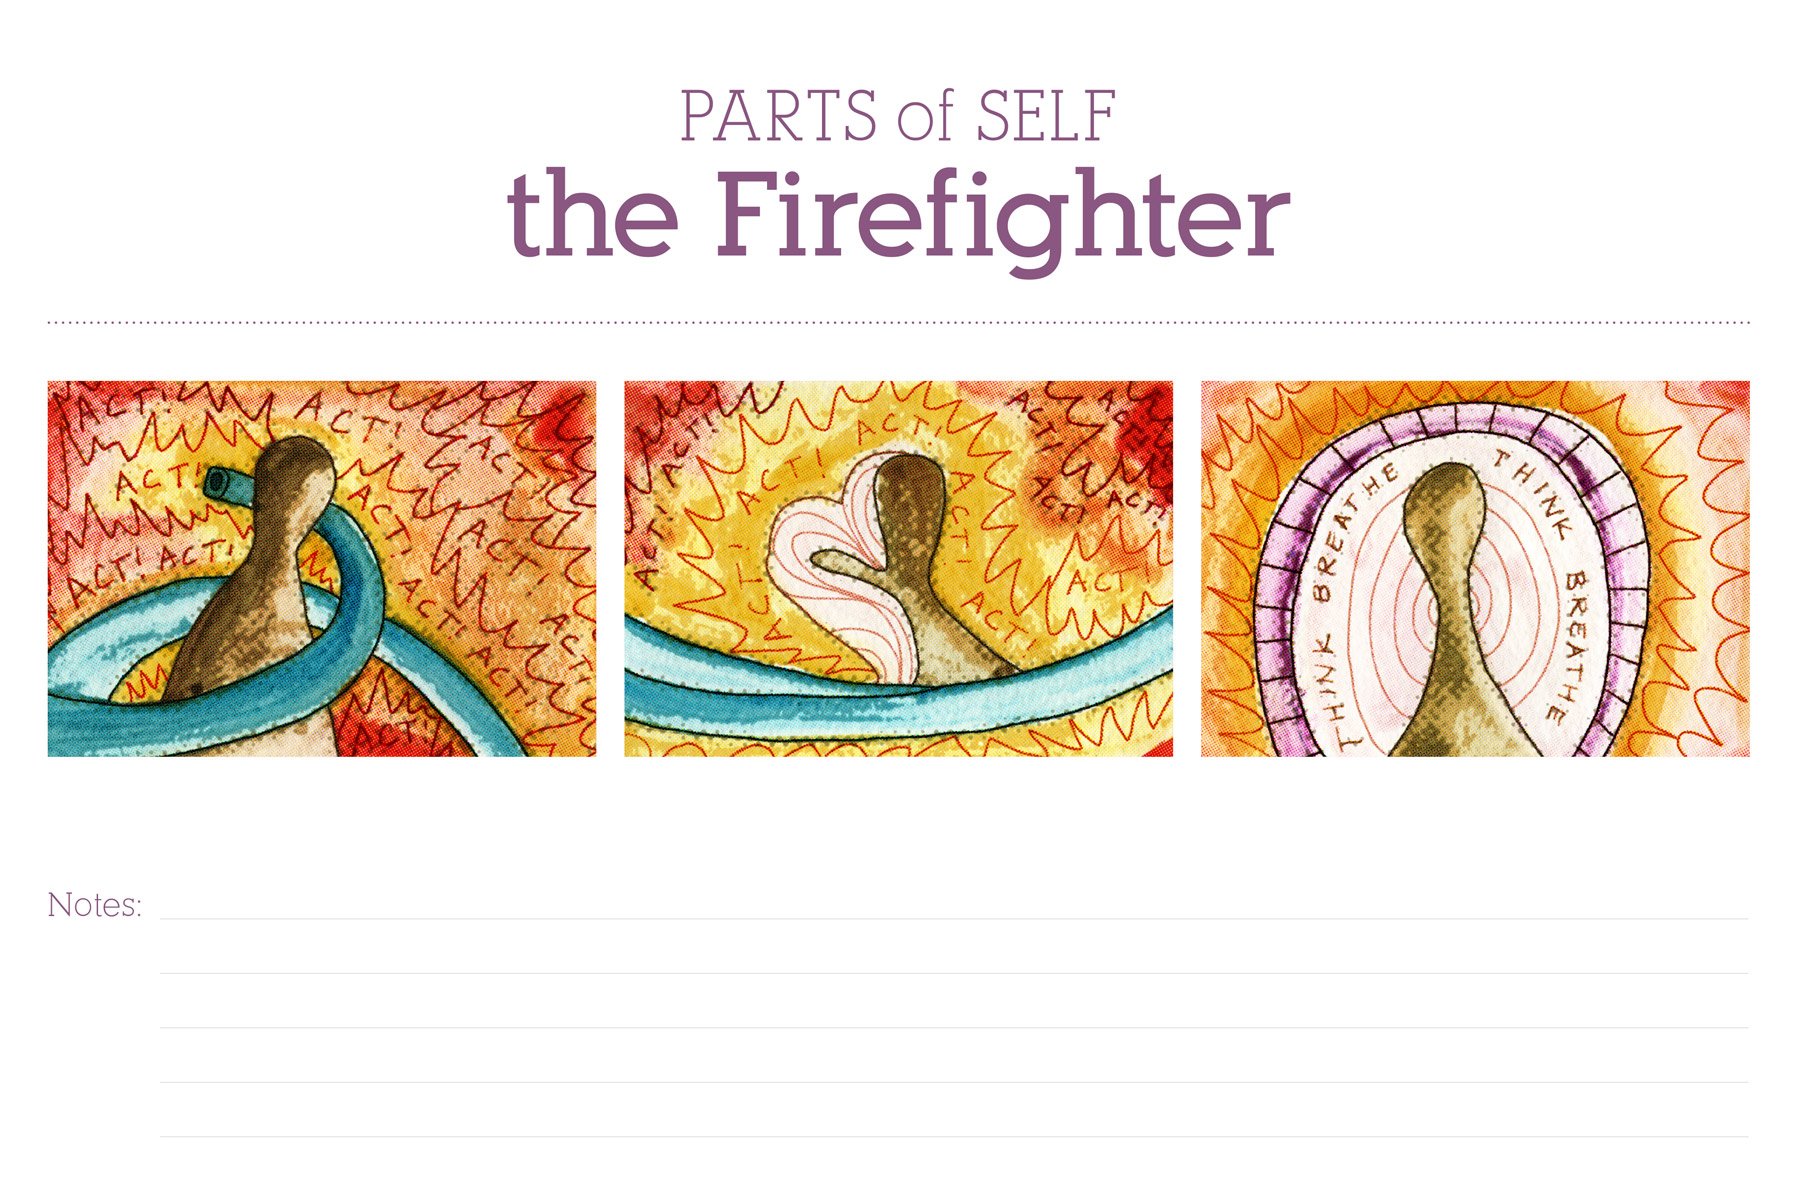 parts-of-self-firefighter.jpg